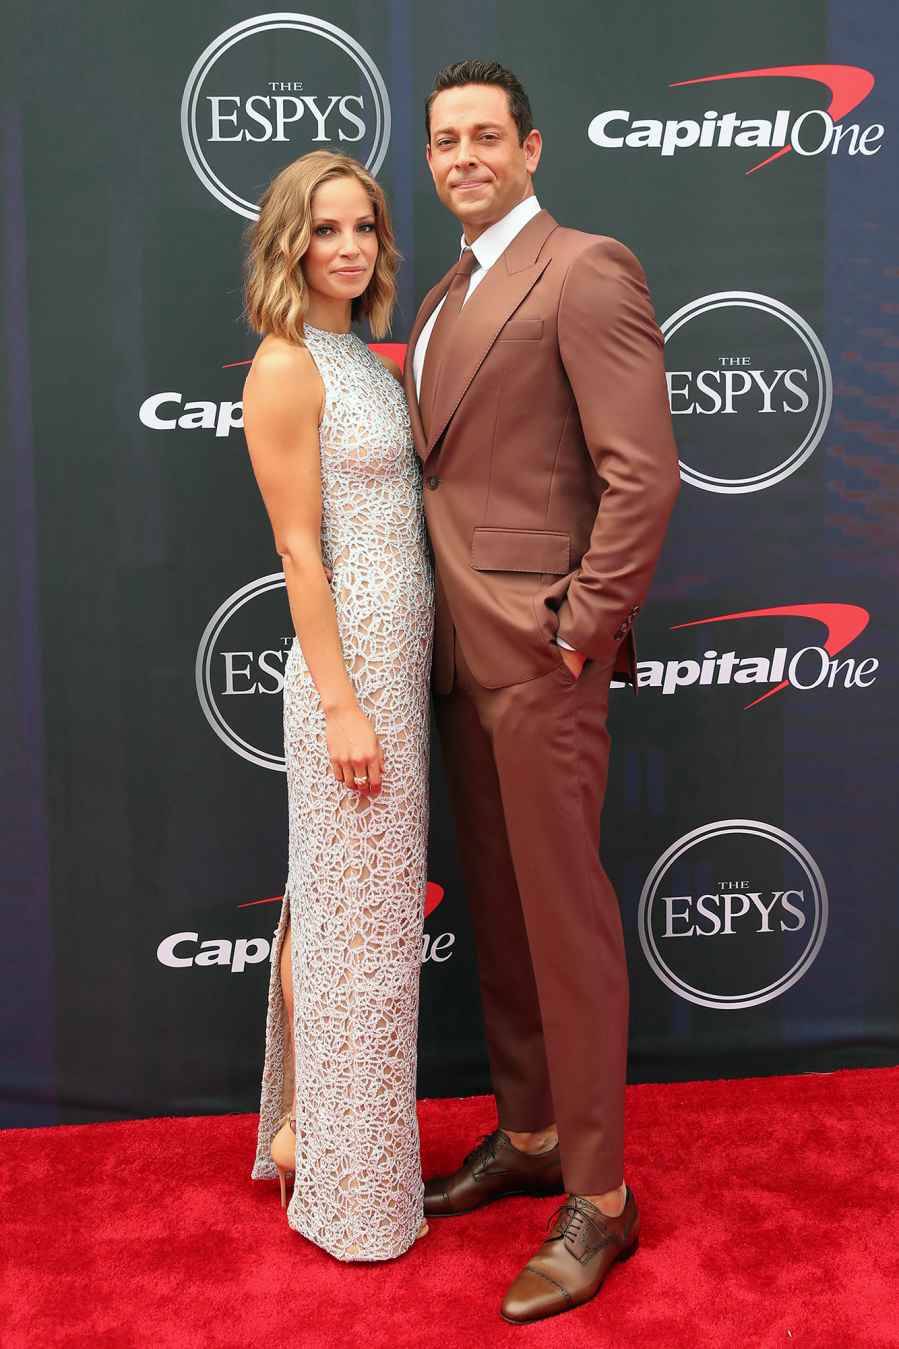 Zachary Levi Makes Red Carpet Debut With Rumored Girlfriend Caroline Tyler at the ESPYs